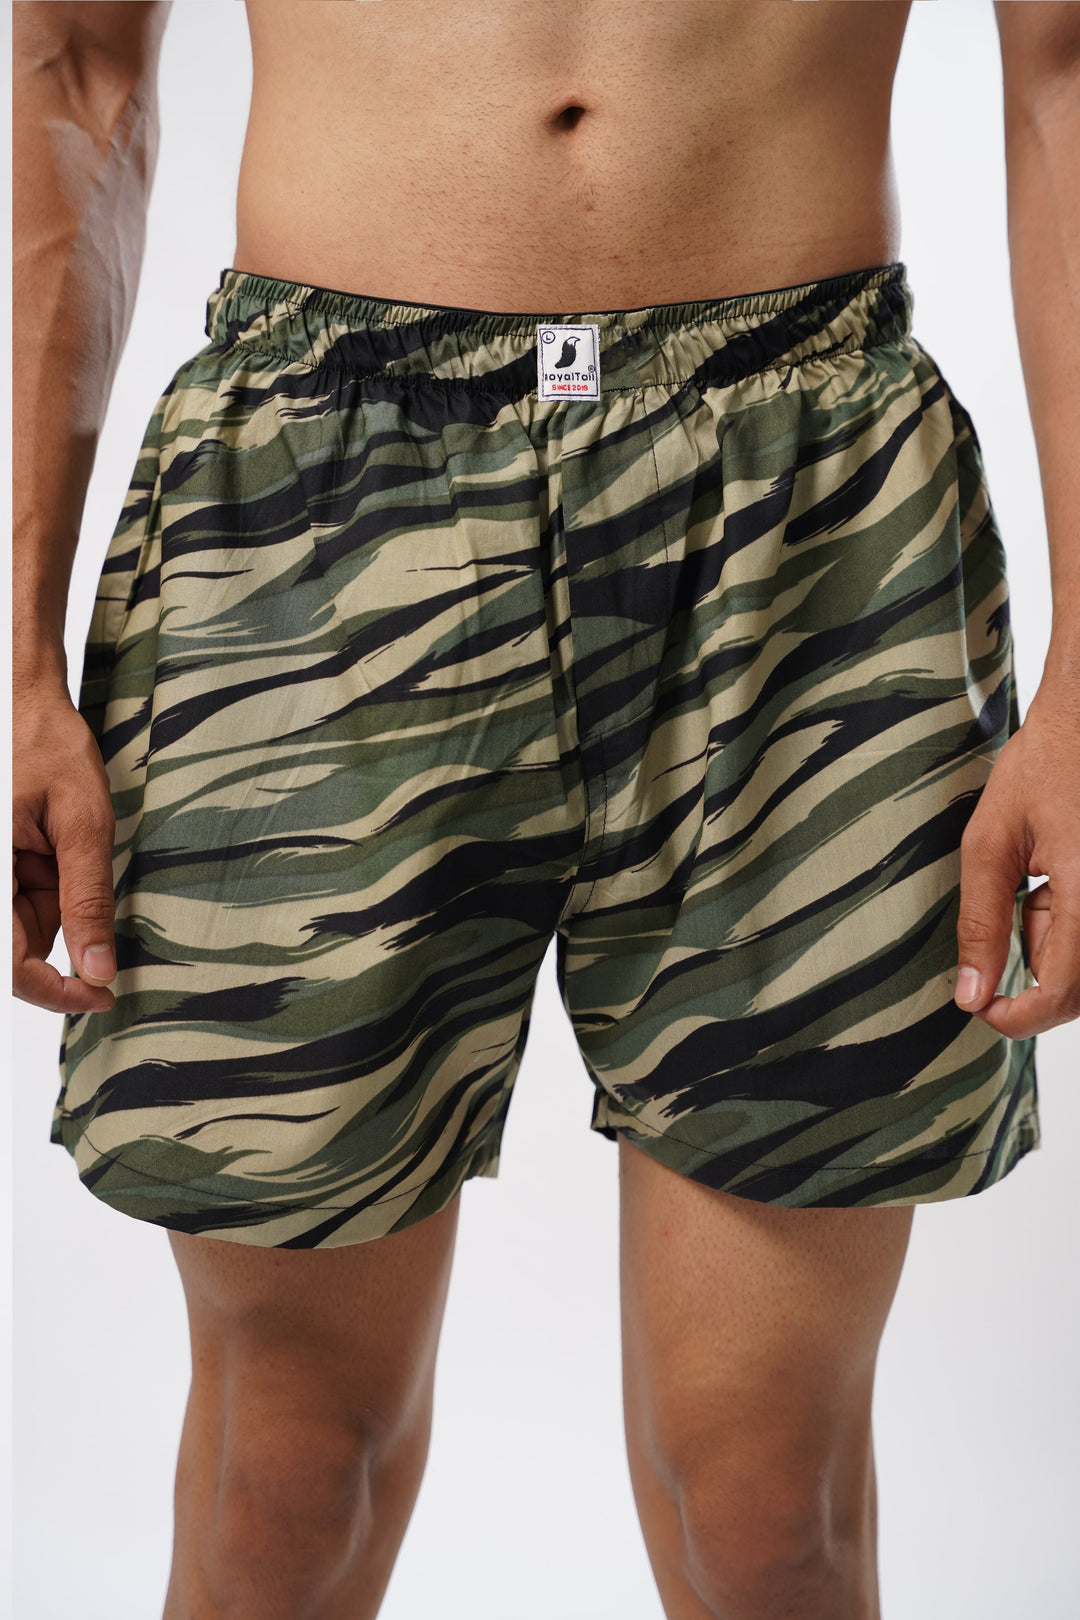 Green Army All Over Printed Men's Boxers